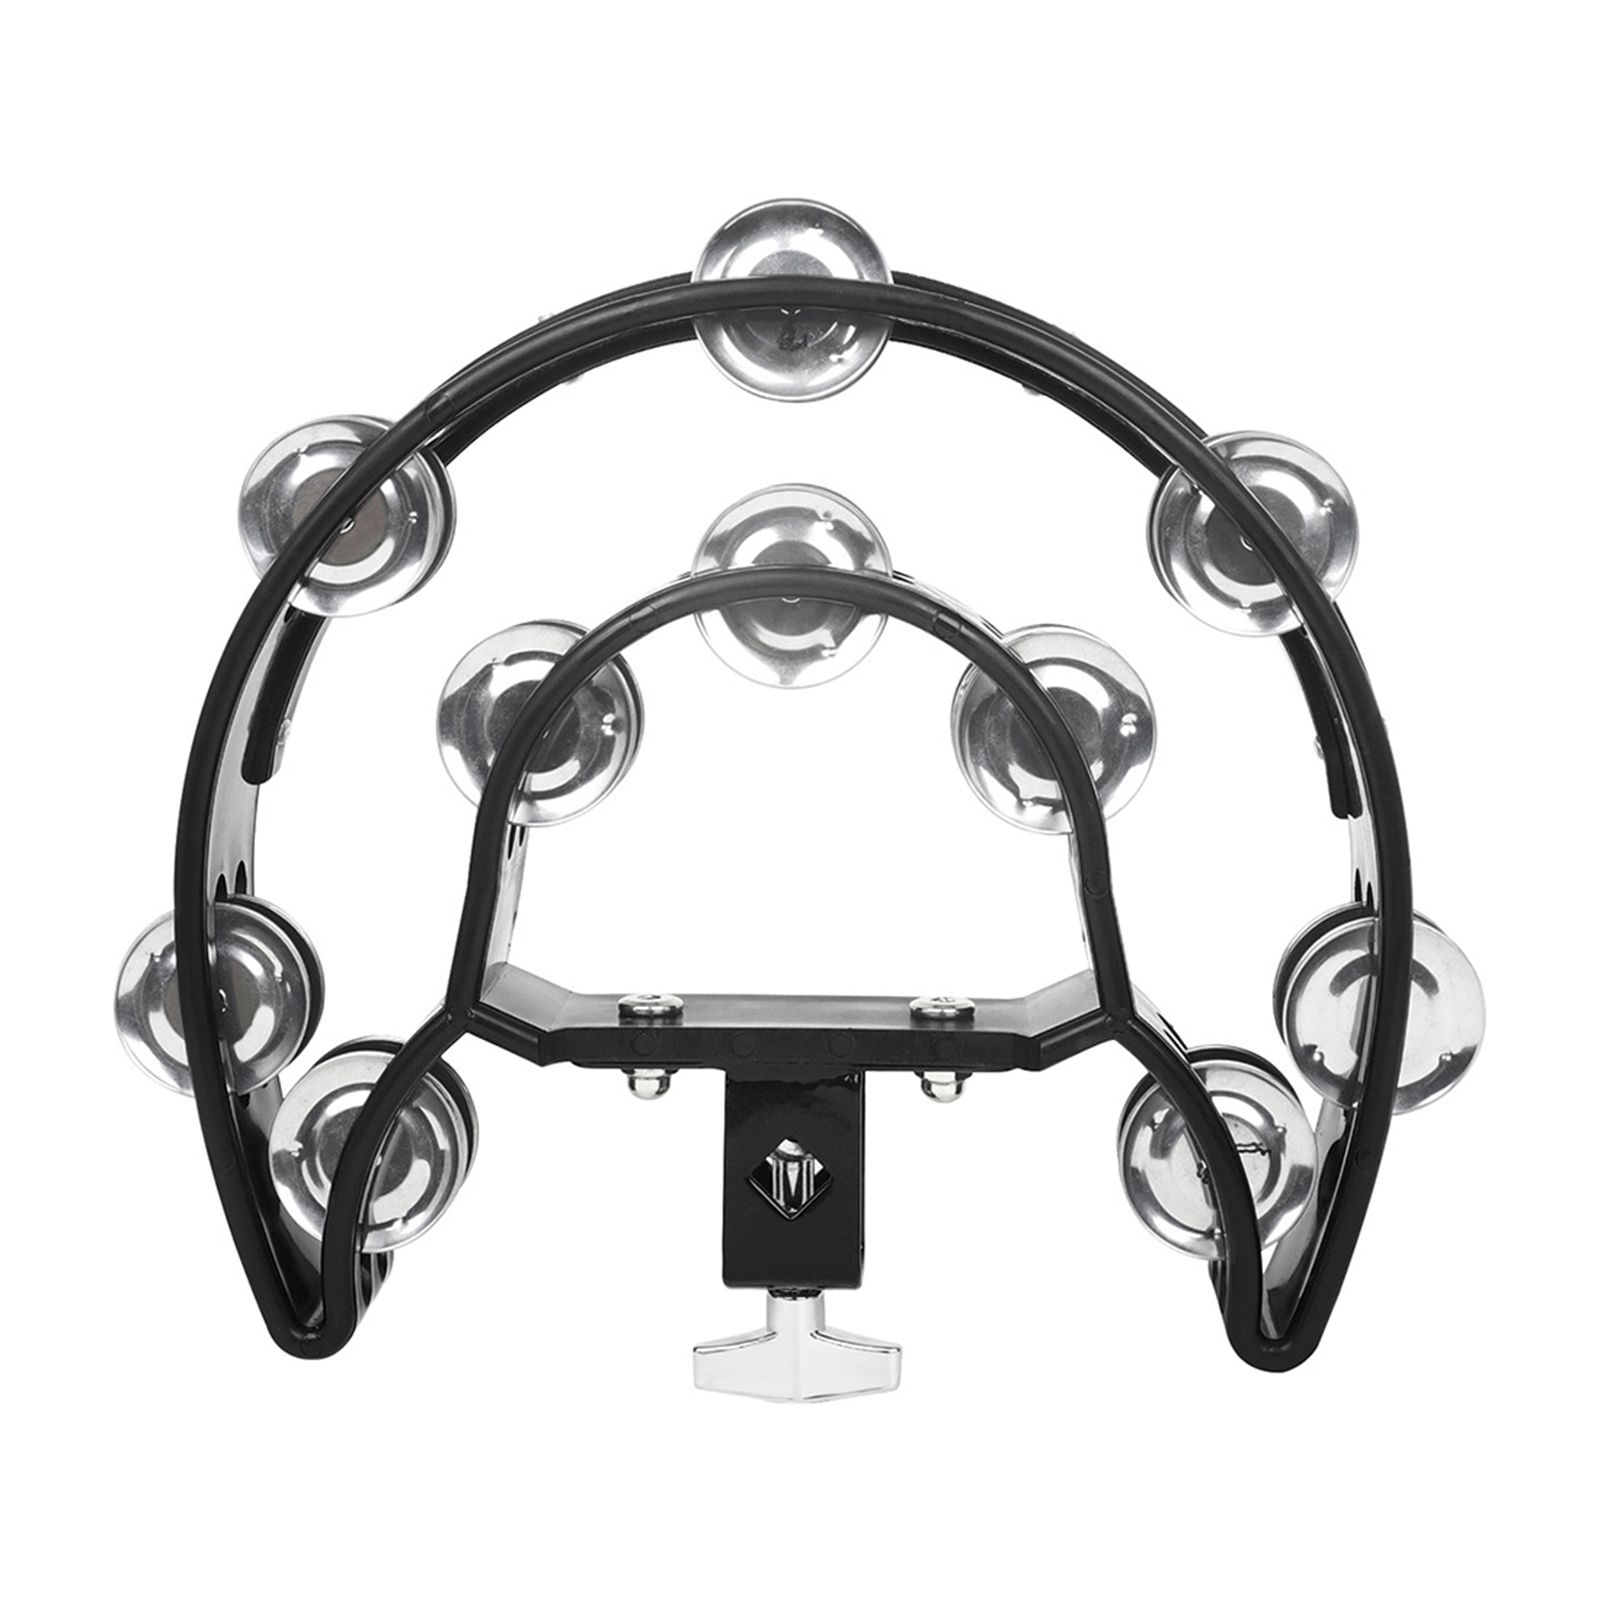 Tambourine Metal Jingles Percussion Instrument Hand Held Tambourines Bell With Clip-on Holder For KTV Party